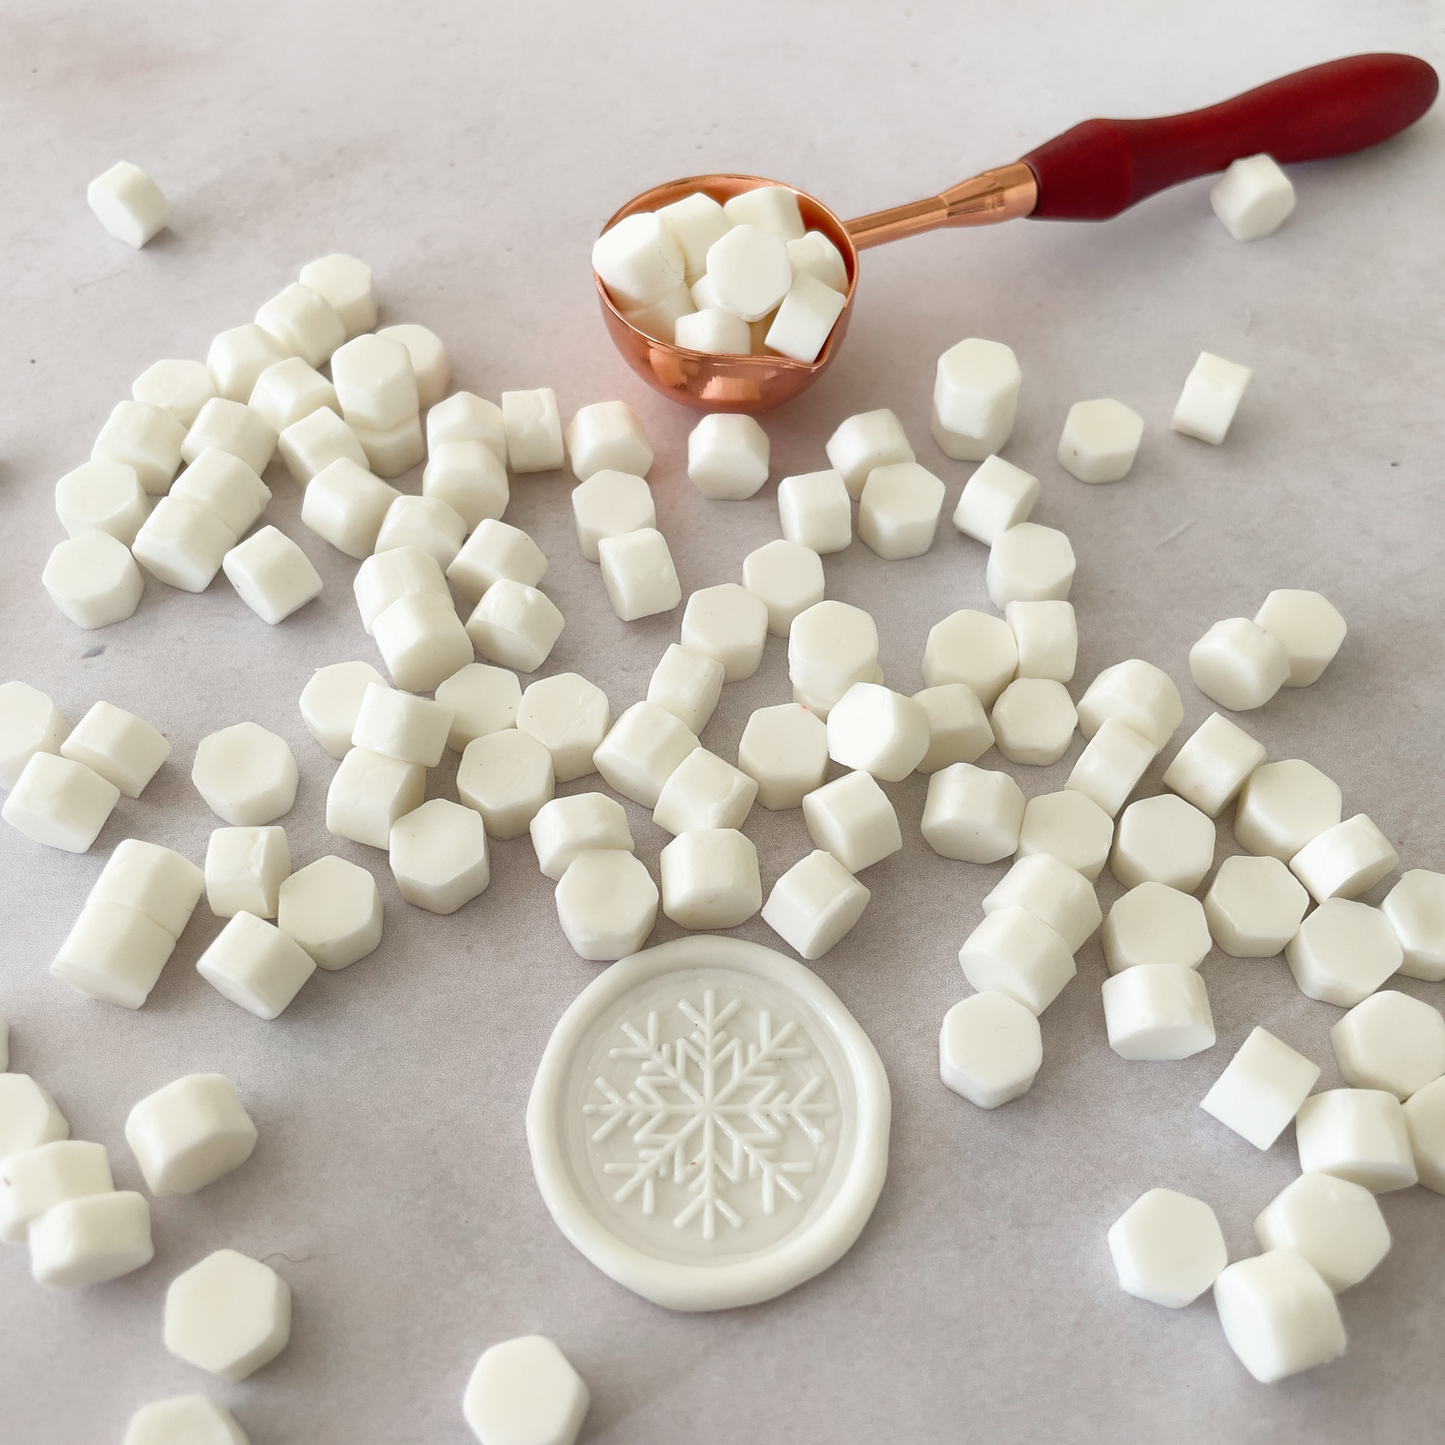 white sealing wax beads.  Wax to make wax stamps and seals